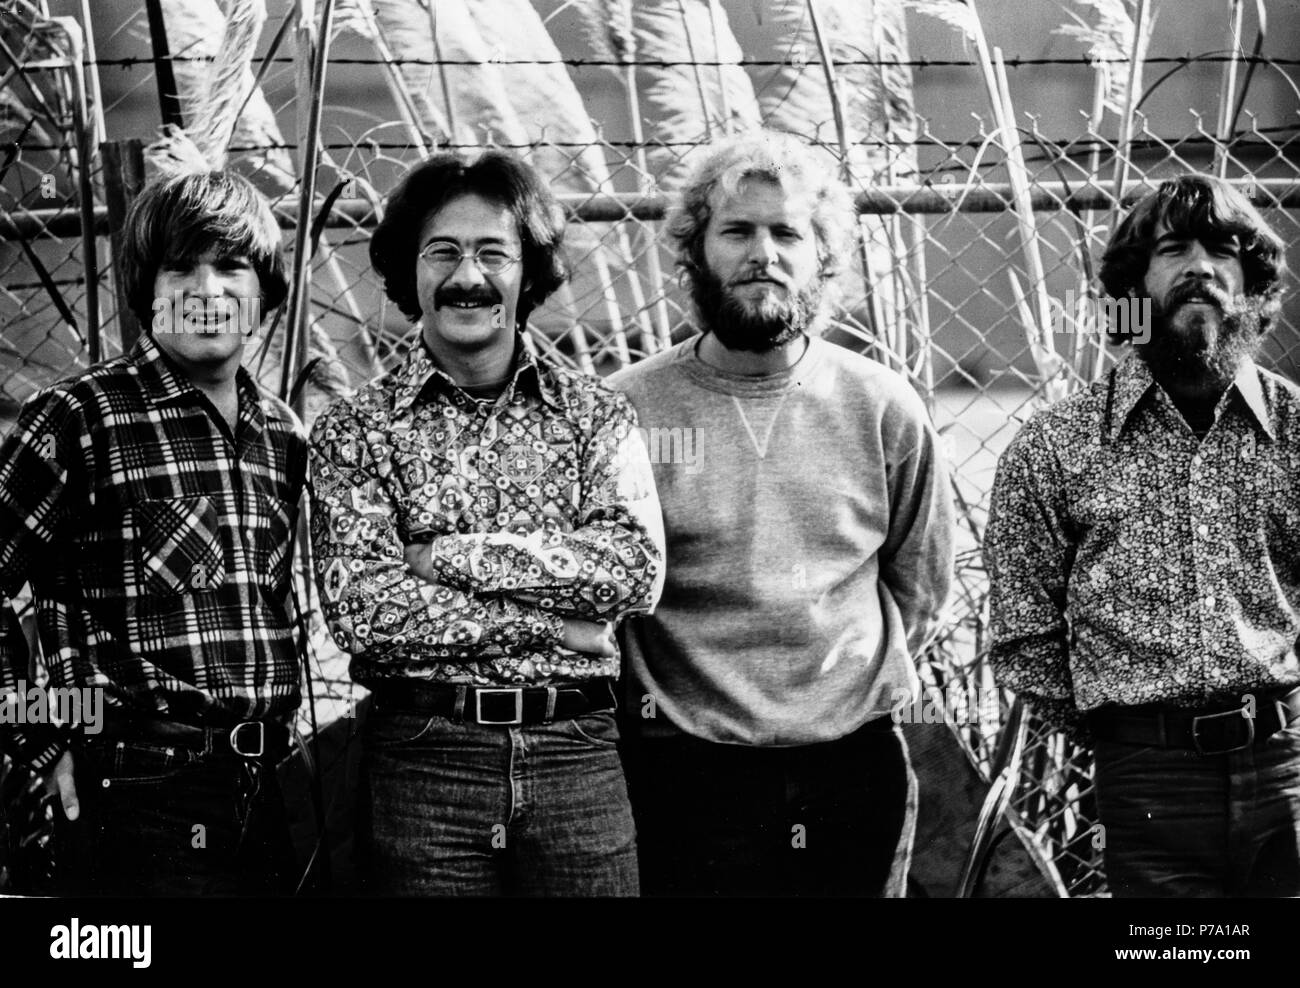 john fogerty, stuart cook, tom fogerty, doug clifford, creedence clearwater revival, 70s Stock Photo